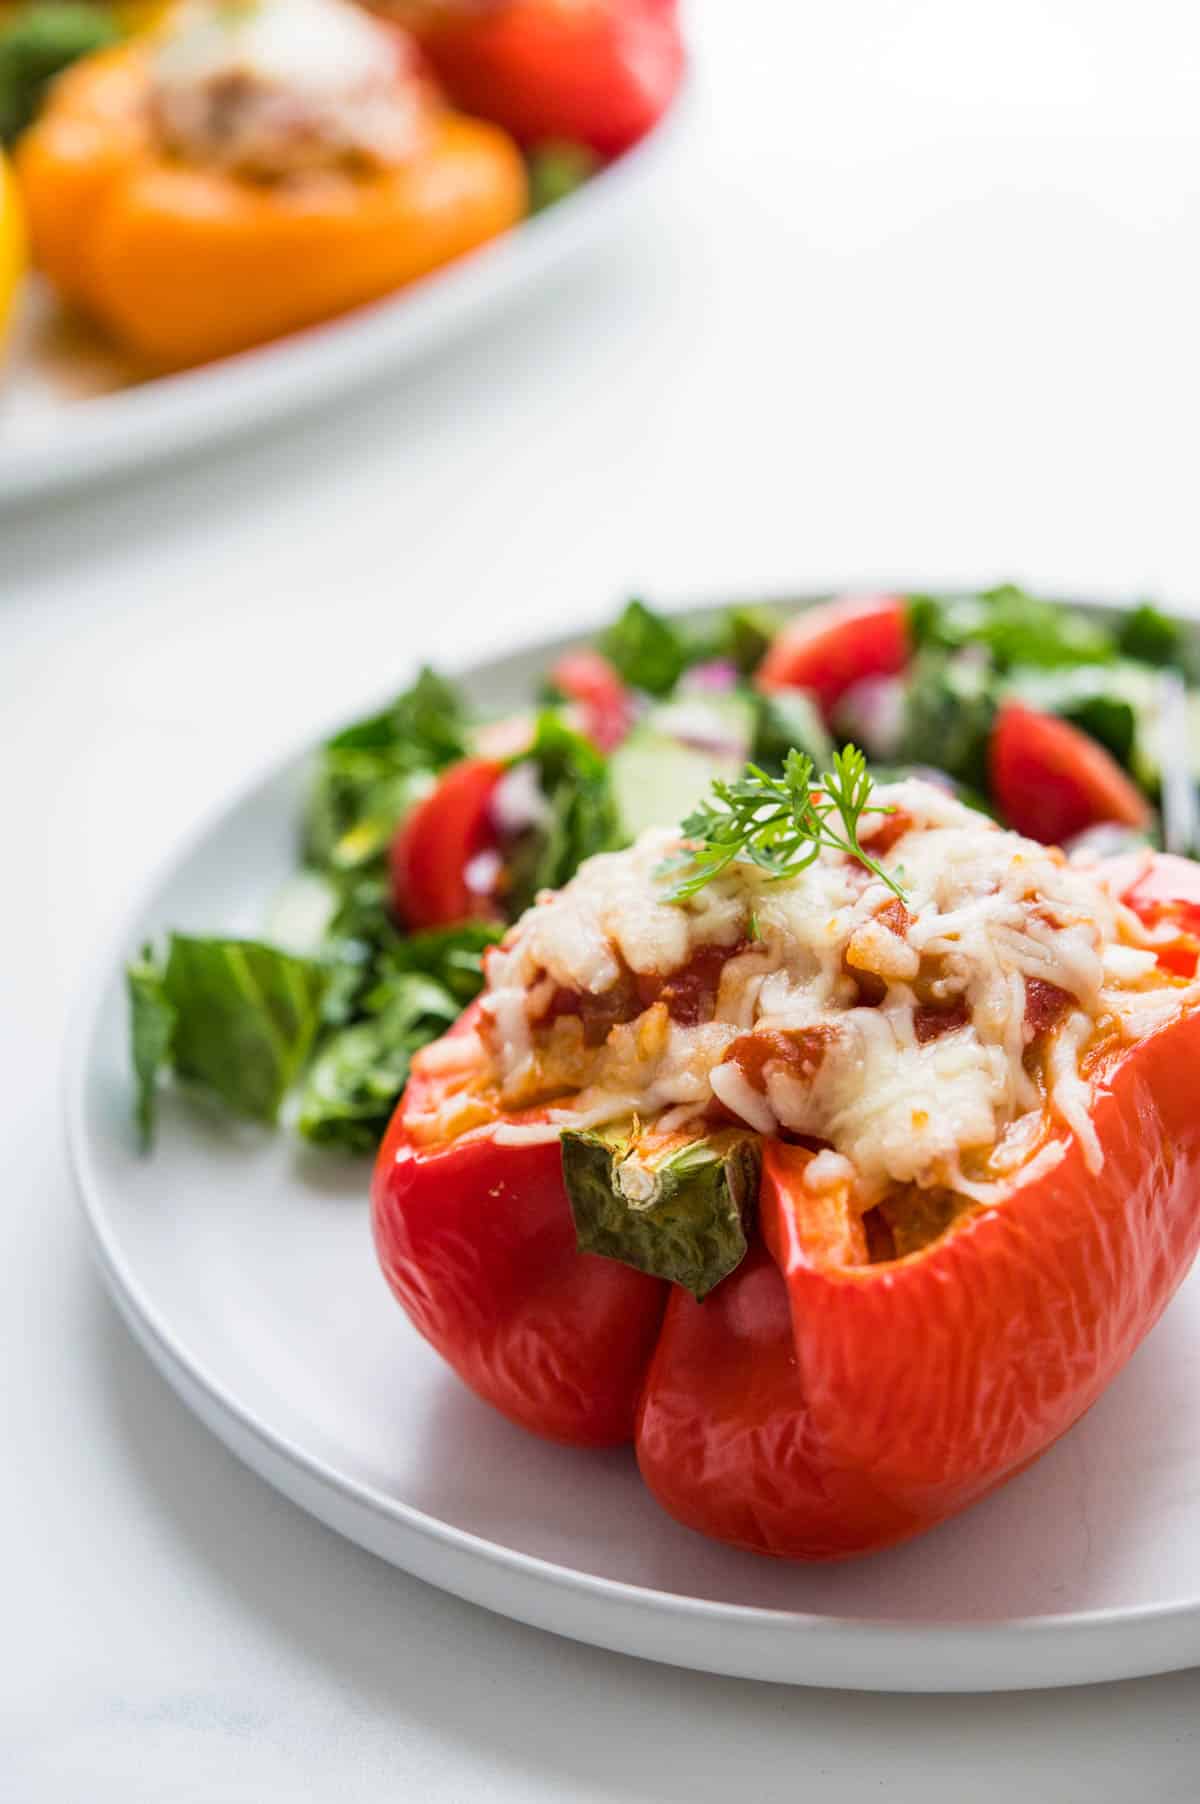 A Mexican Stuffed pepper on a plate with a green salad.